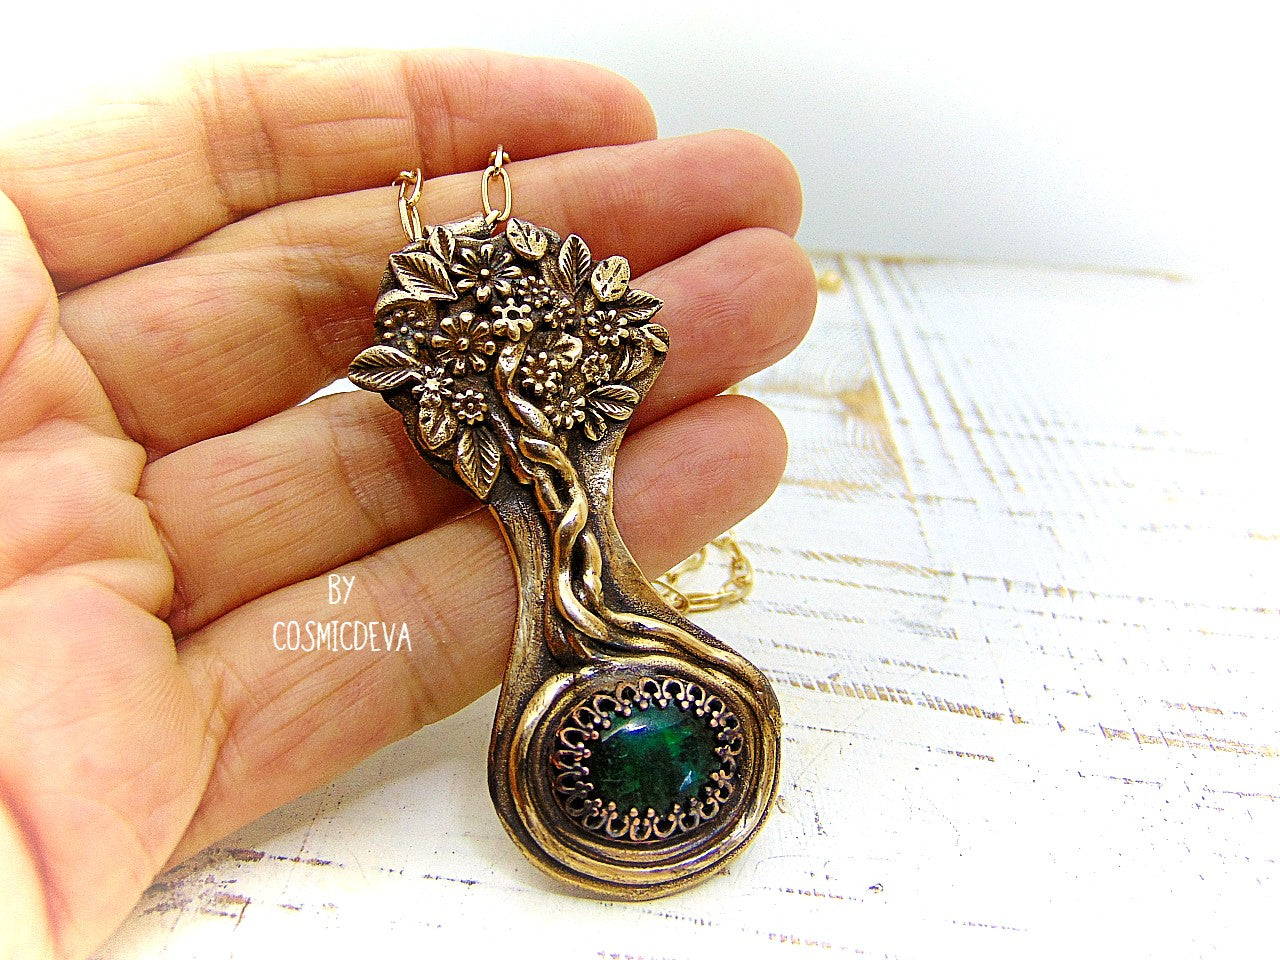 Express your love of life and nature with this intricately-crafted Tree of Life pendant necklace. Handcrafted from solid bronze with a beautiful emerald stone at its root, this unique piece of jewelry celebrates togetherness, growth, and individuality. Give yourself or a loved one the enduring gift of its timeless symbolism.